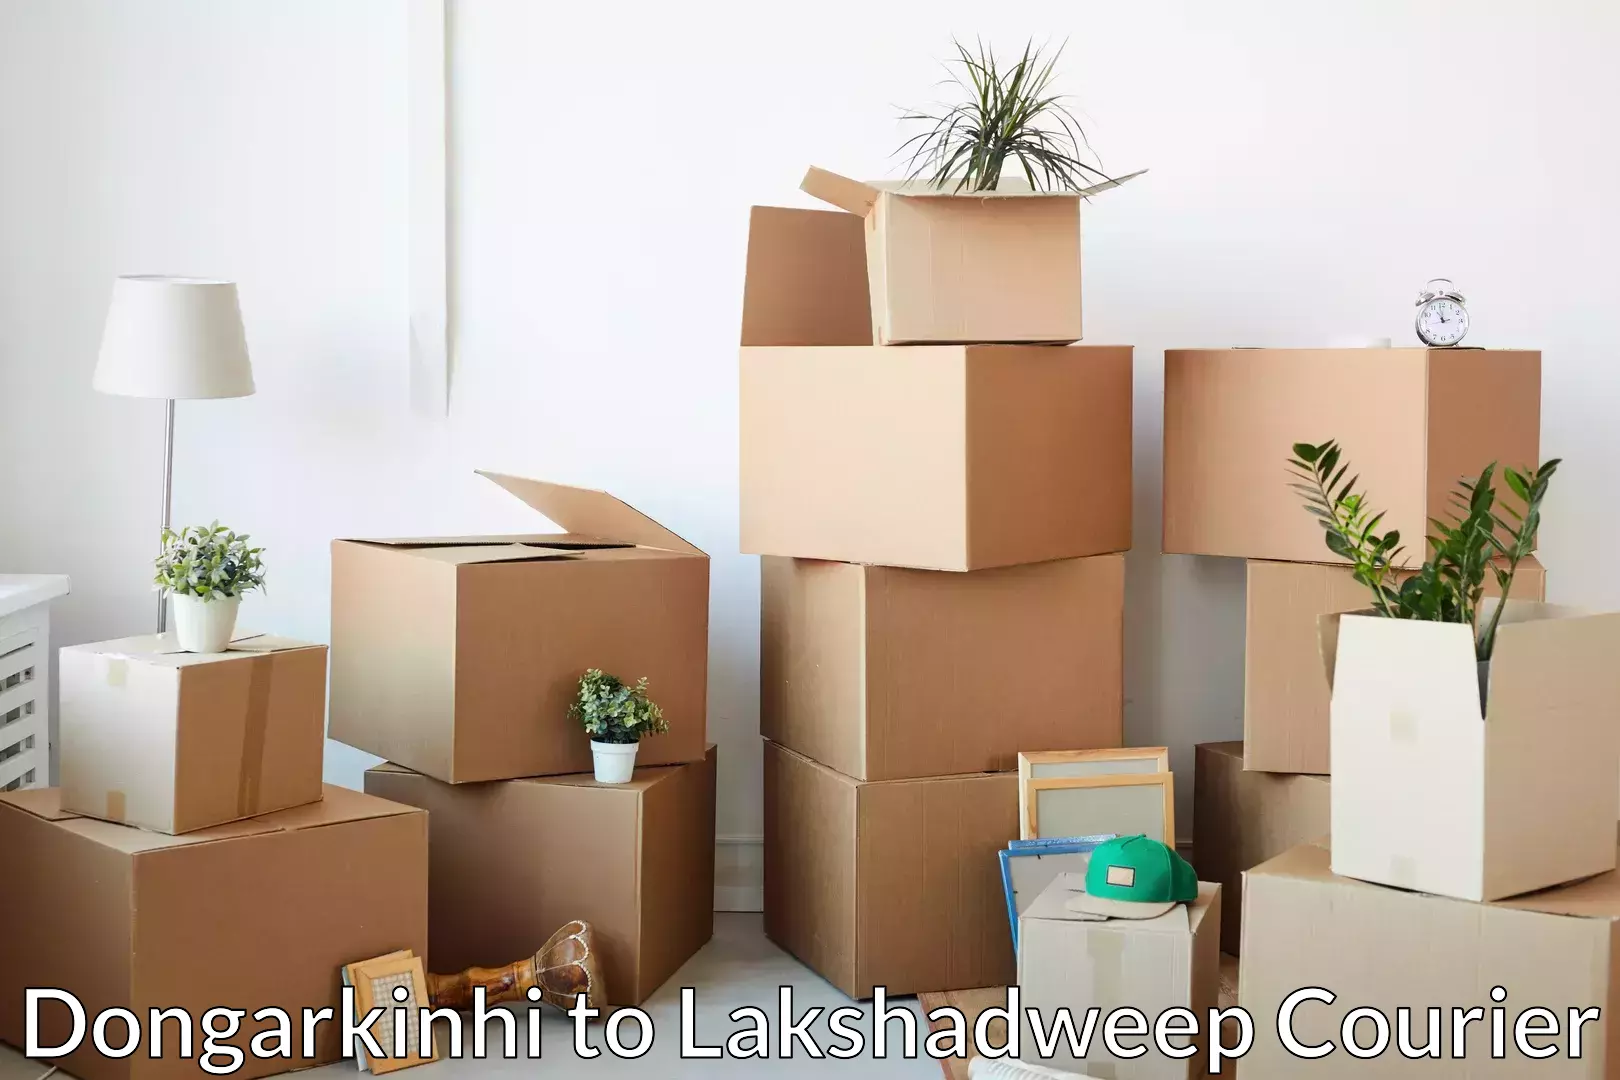 Professional packing services Dongarkinhi to Lakshadweep